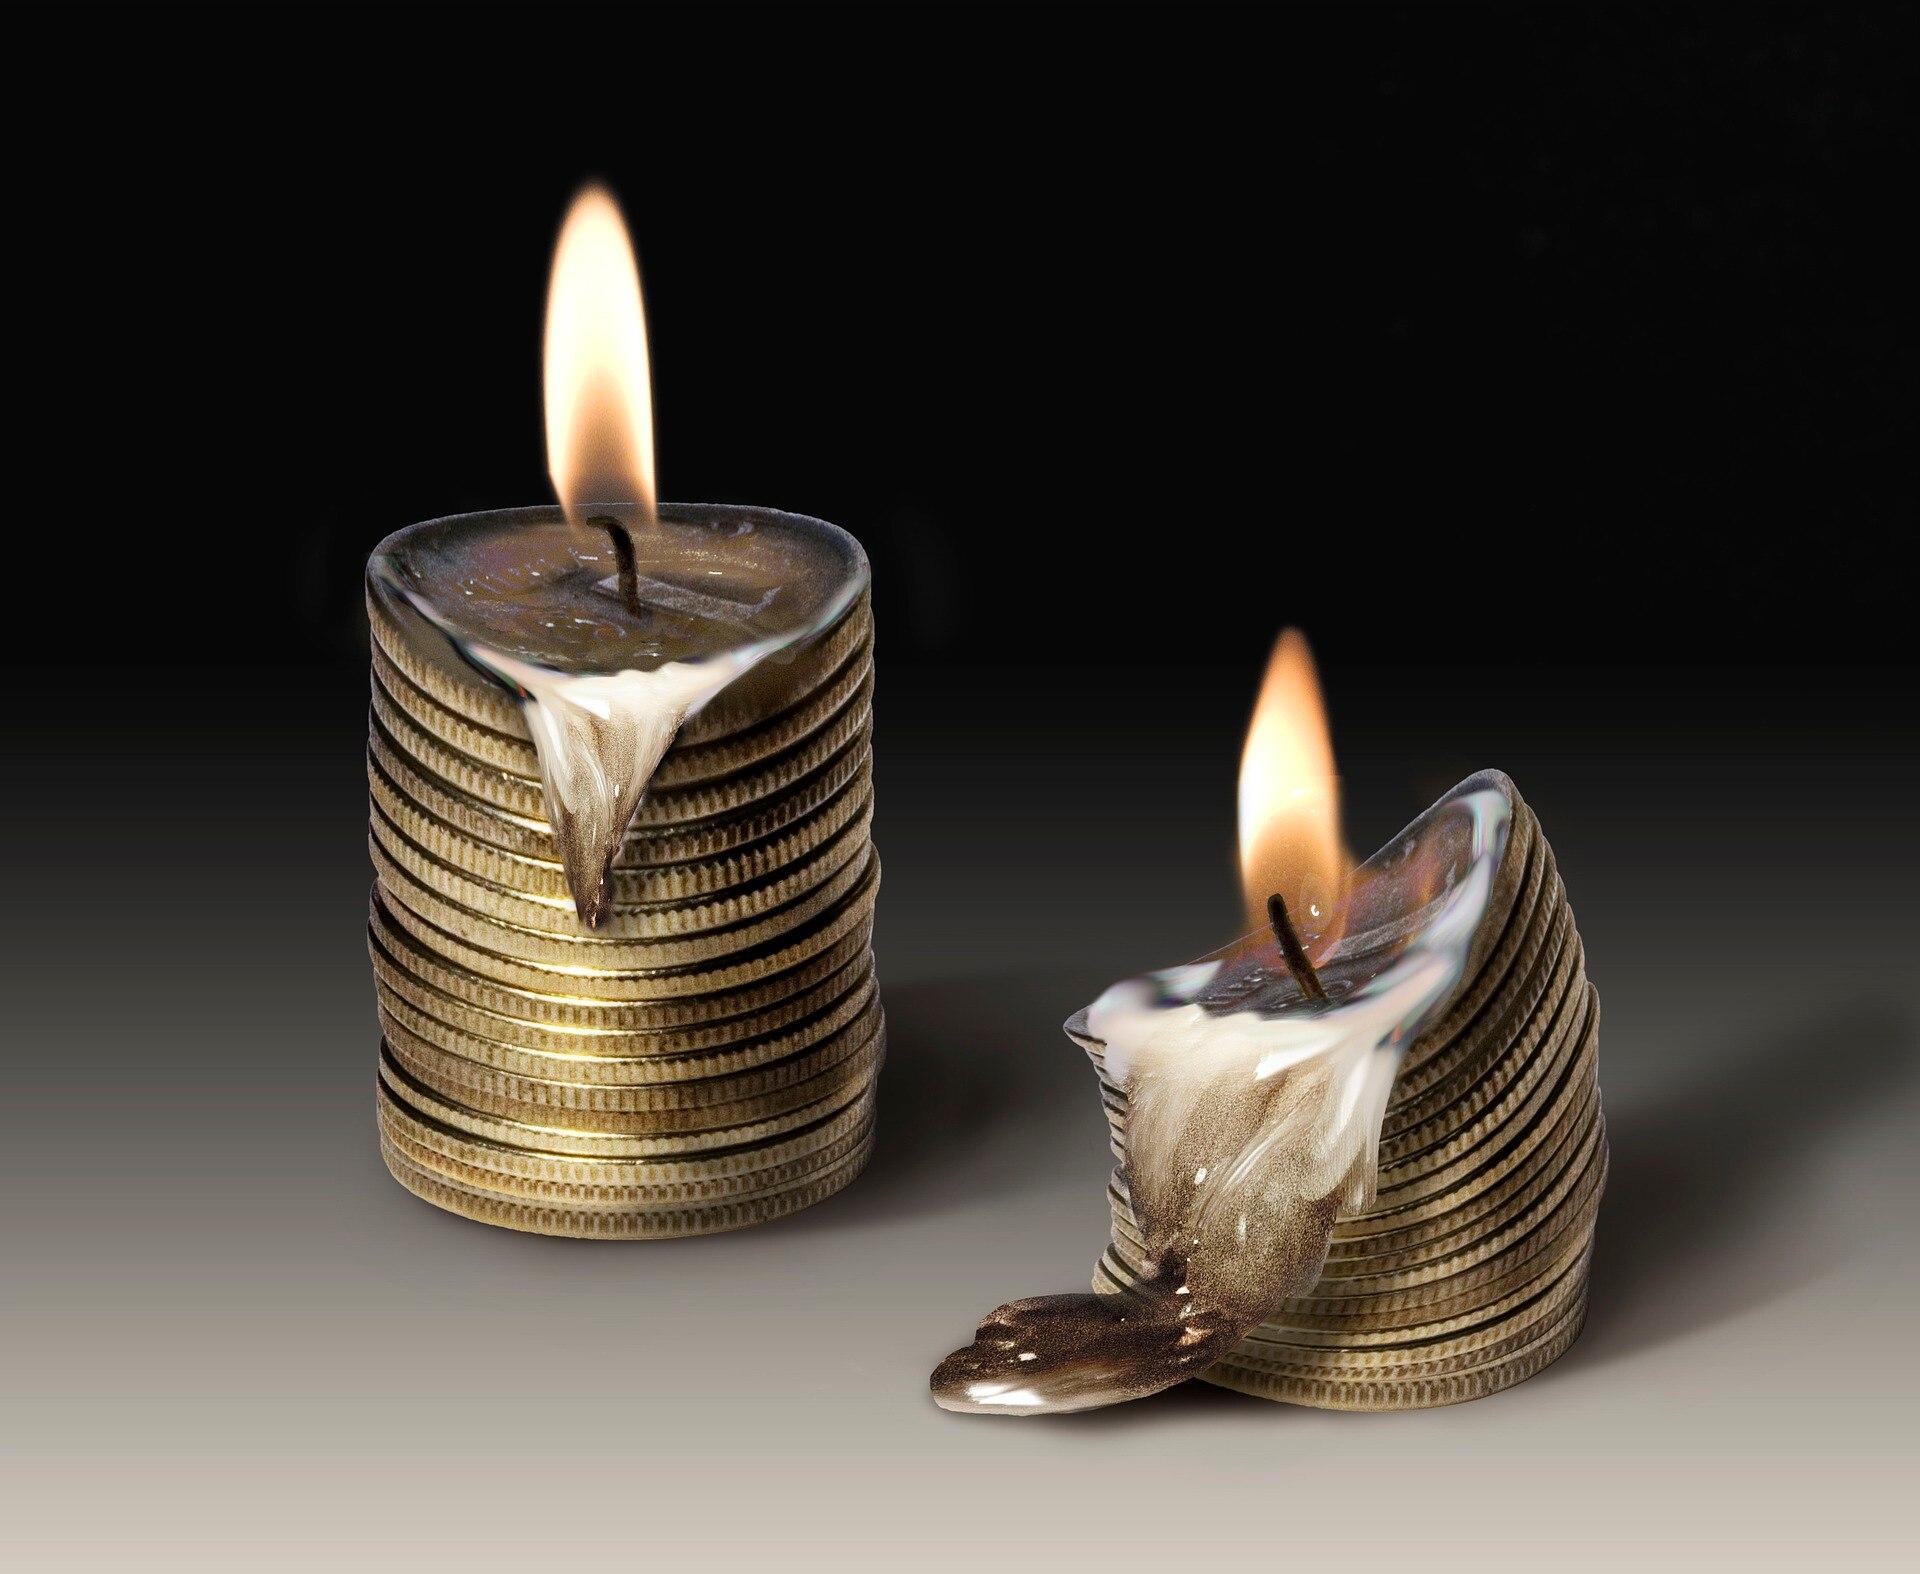 Two stacks of coins next to each other with candle wicks on top that are lit up and have been slowly melting the coin stacks.